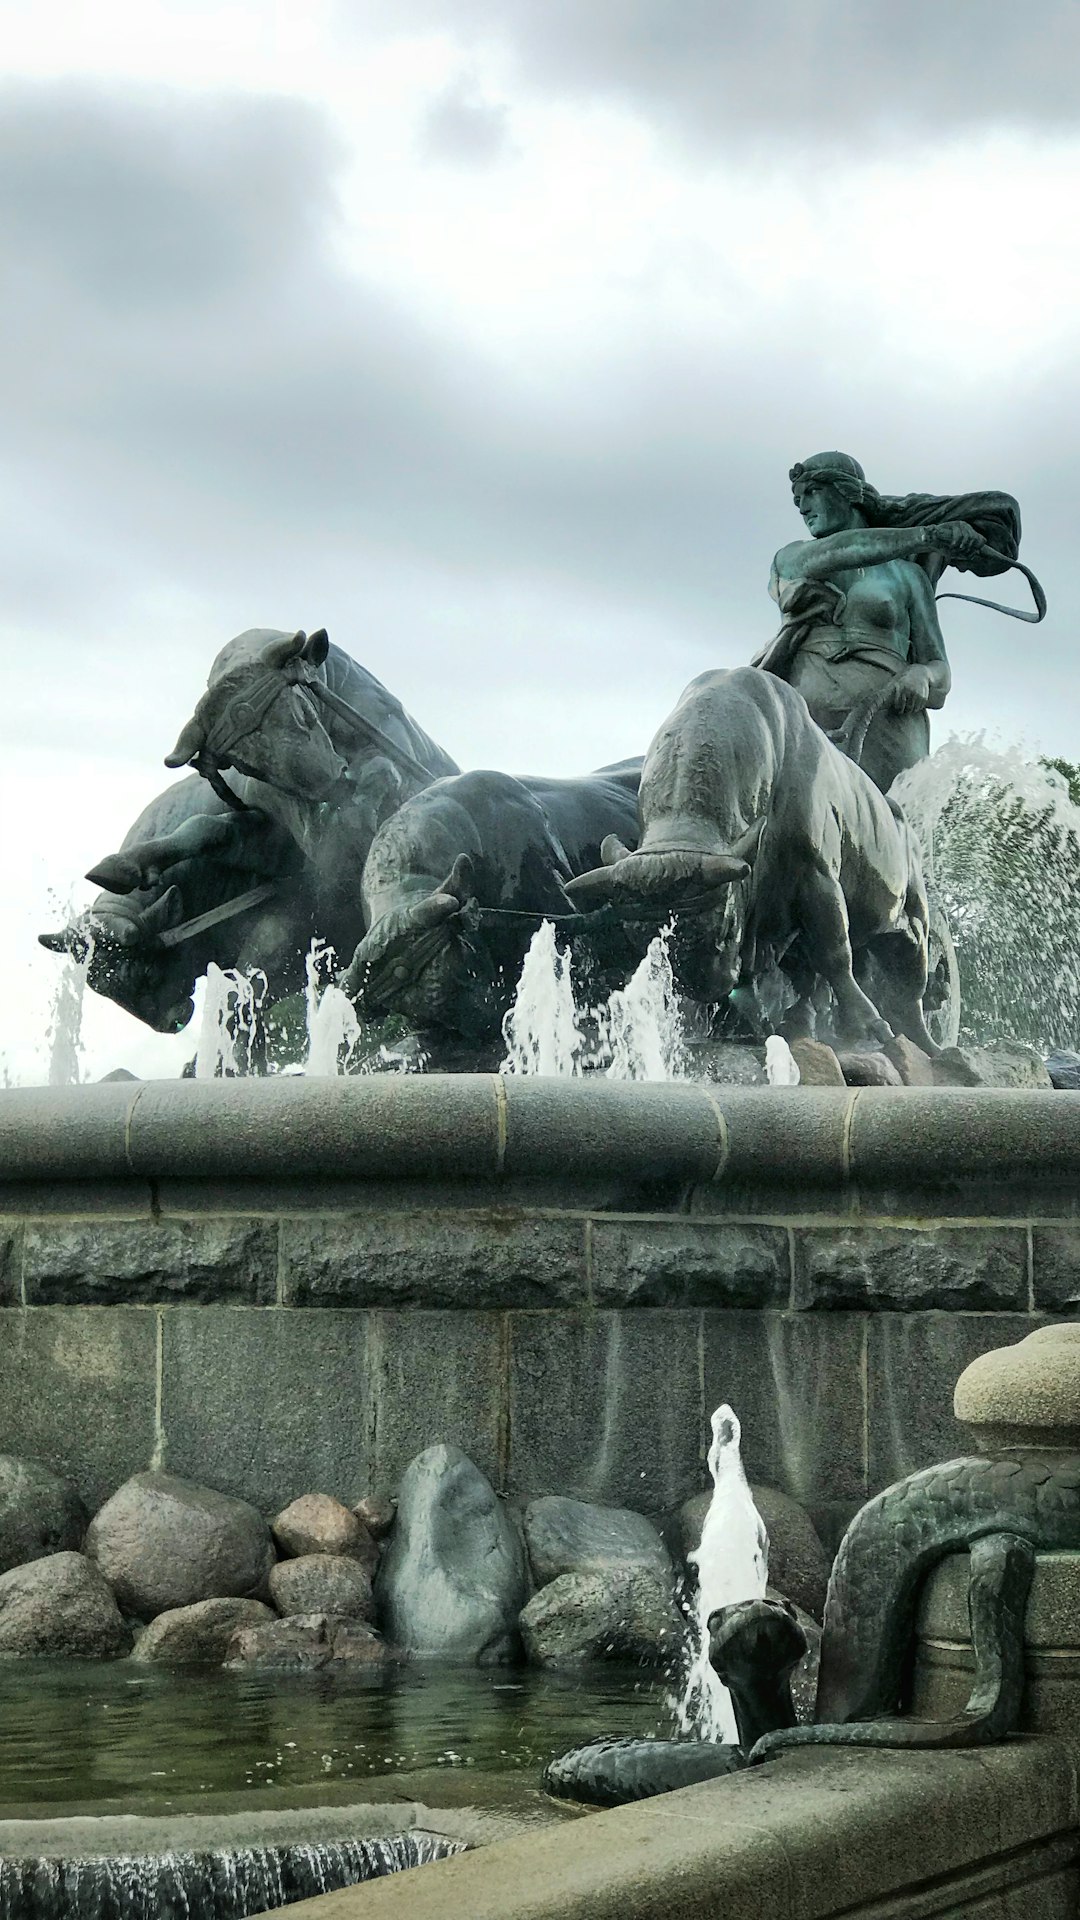 Travel Tips and Stories of Gefion Fountain in Denmark